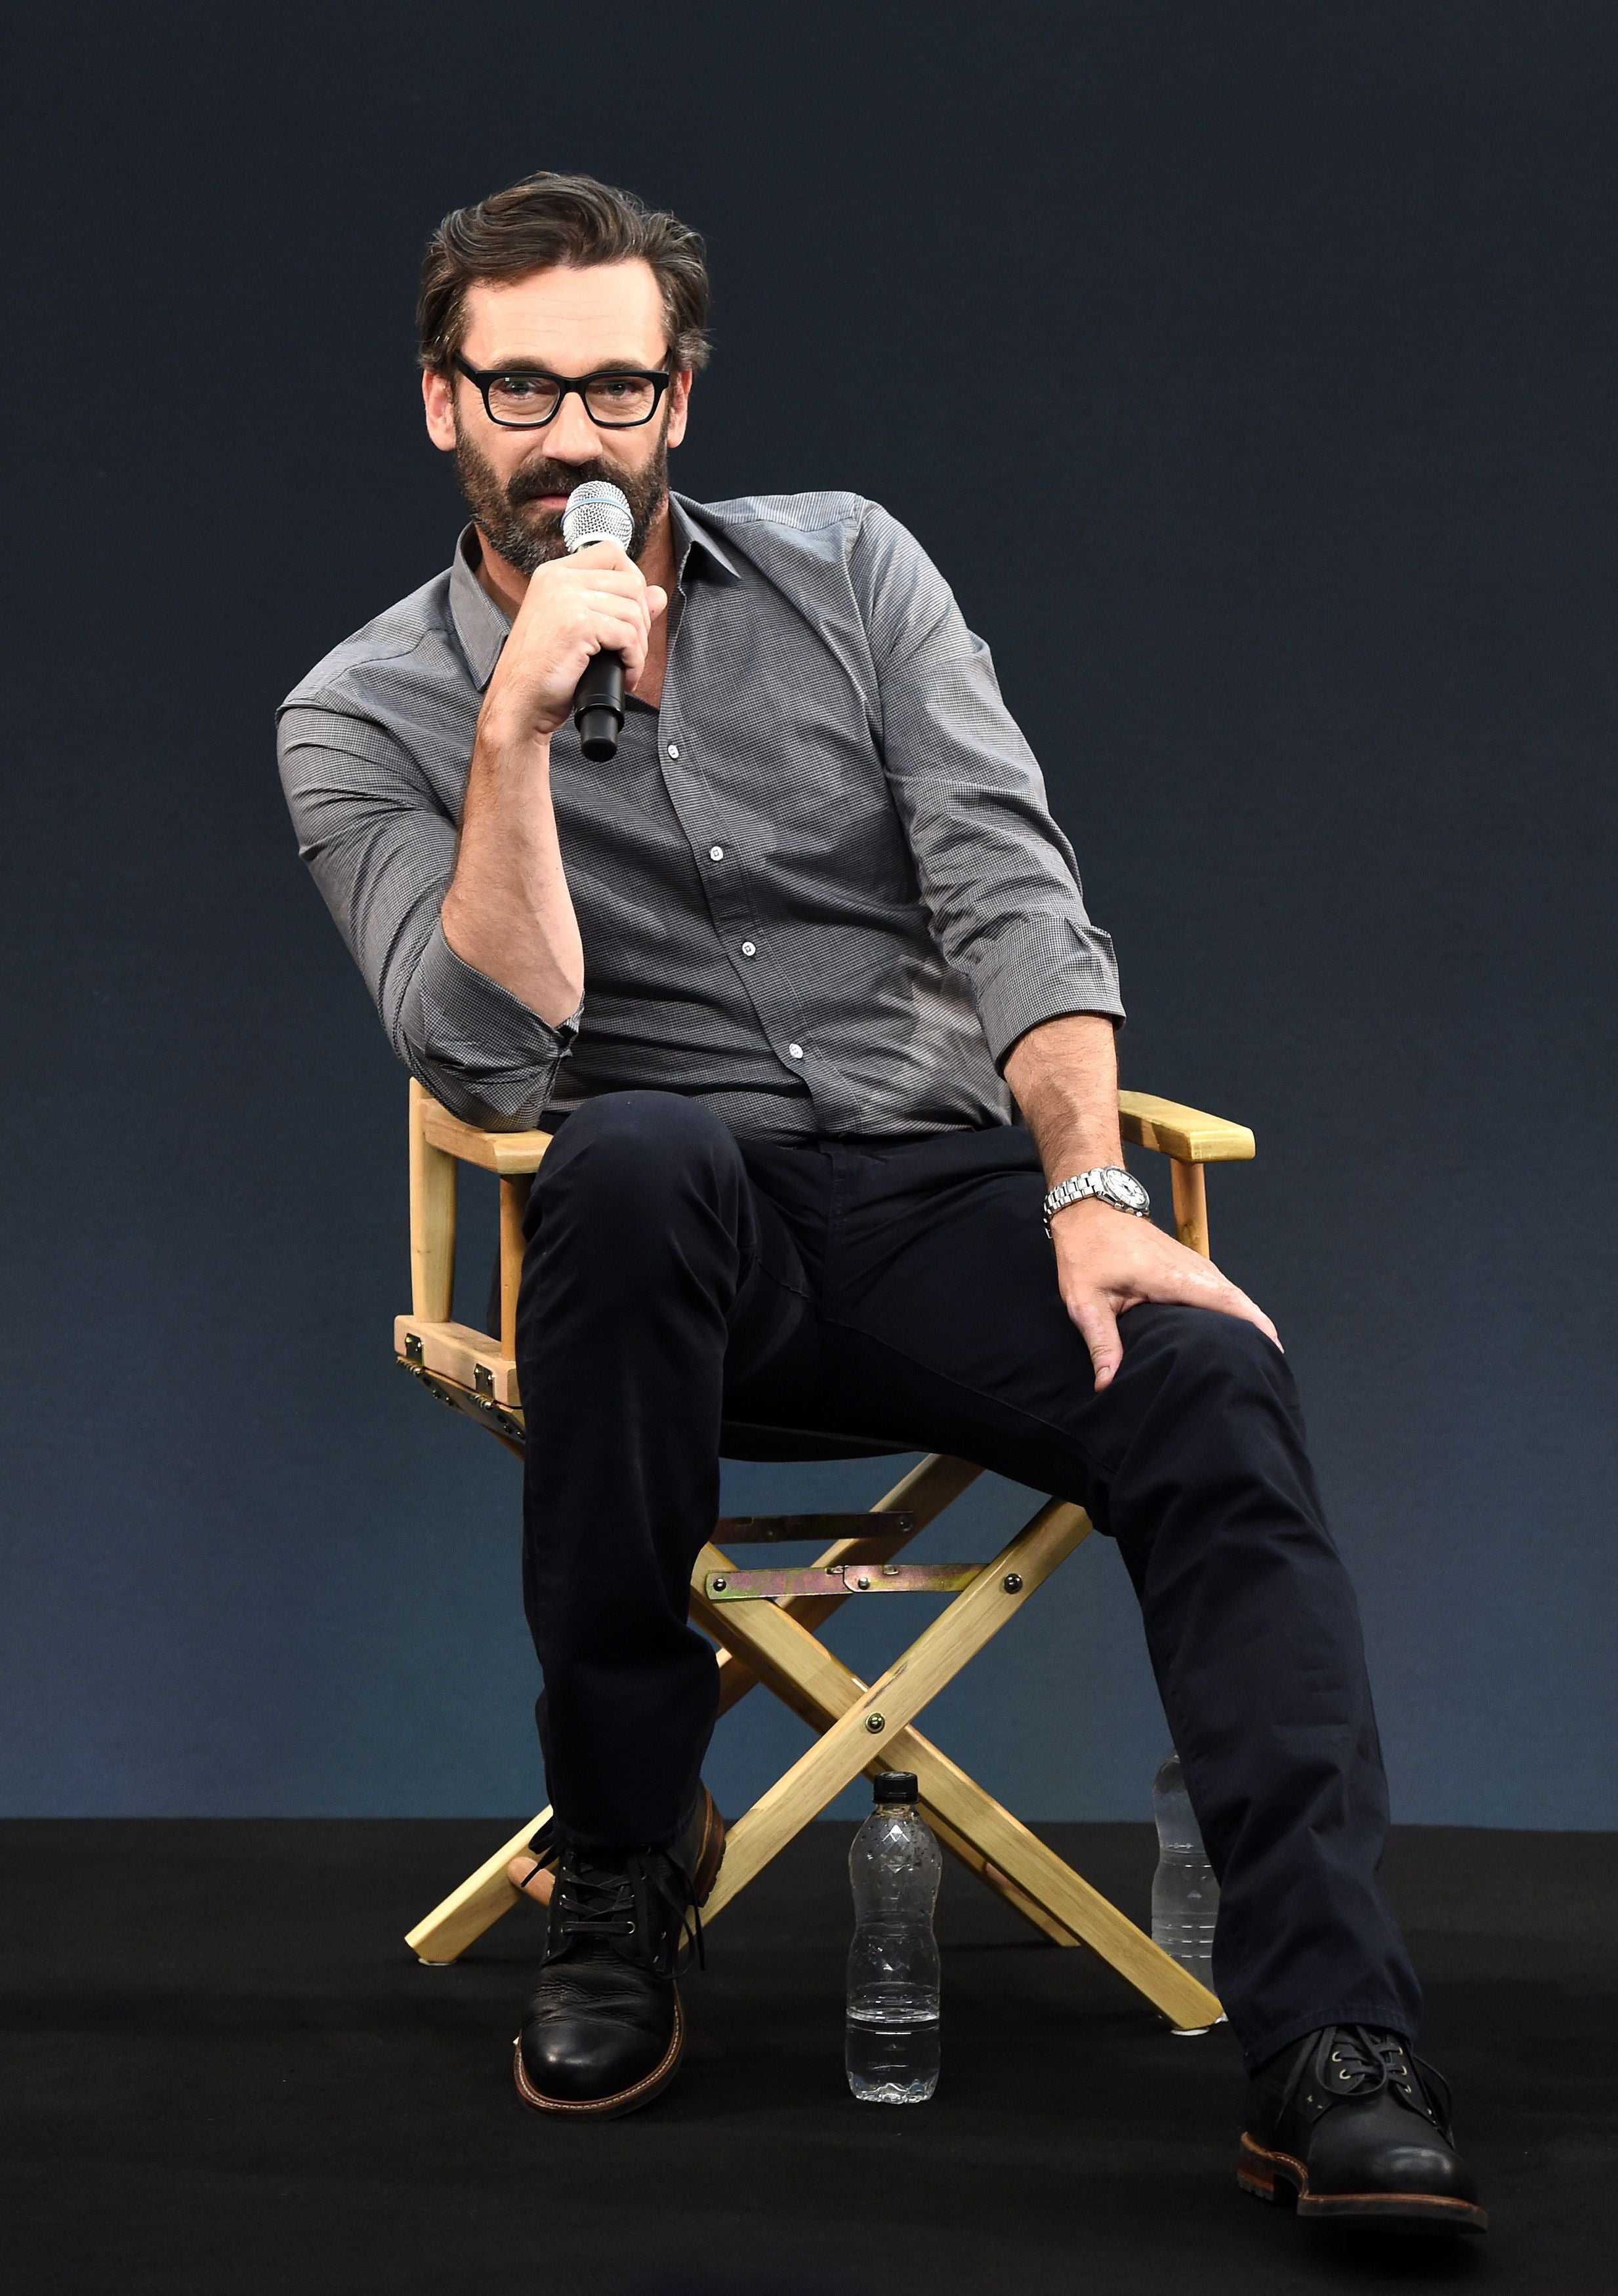 Jon Hamm promotes his new film Million Dollar Arm during the Meet the Actor: Jon Hamm event at the Apple Store in London.